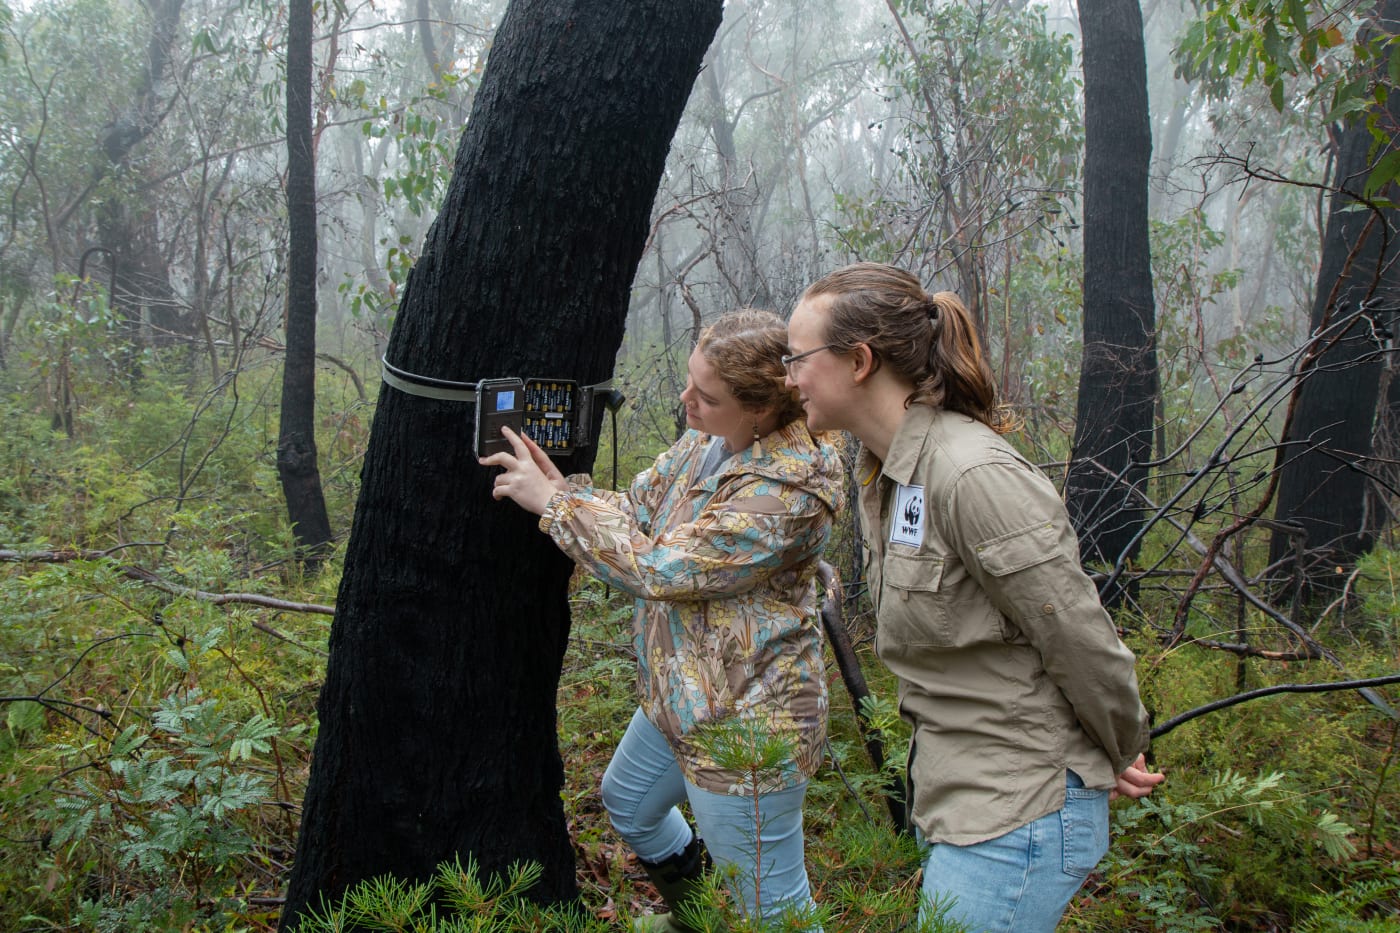 Melinda Kerr from the Blue Mountains World Heritage Institute (left) and Dr Emma Spencer from WWF-Australia (right) check a sensor camera in the Blue Mountains as part of the Eyes on Recovery project.